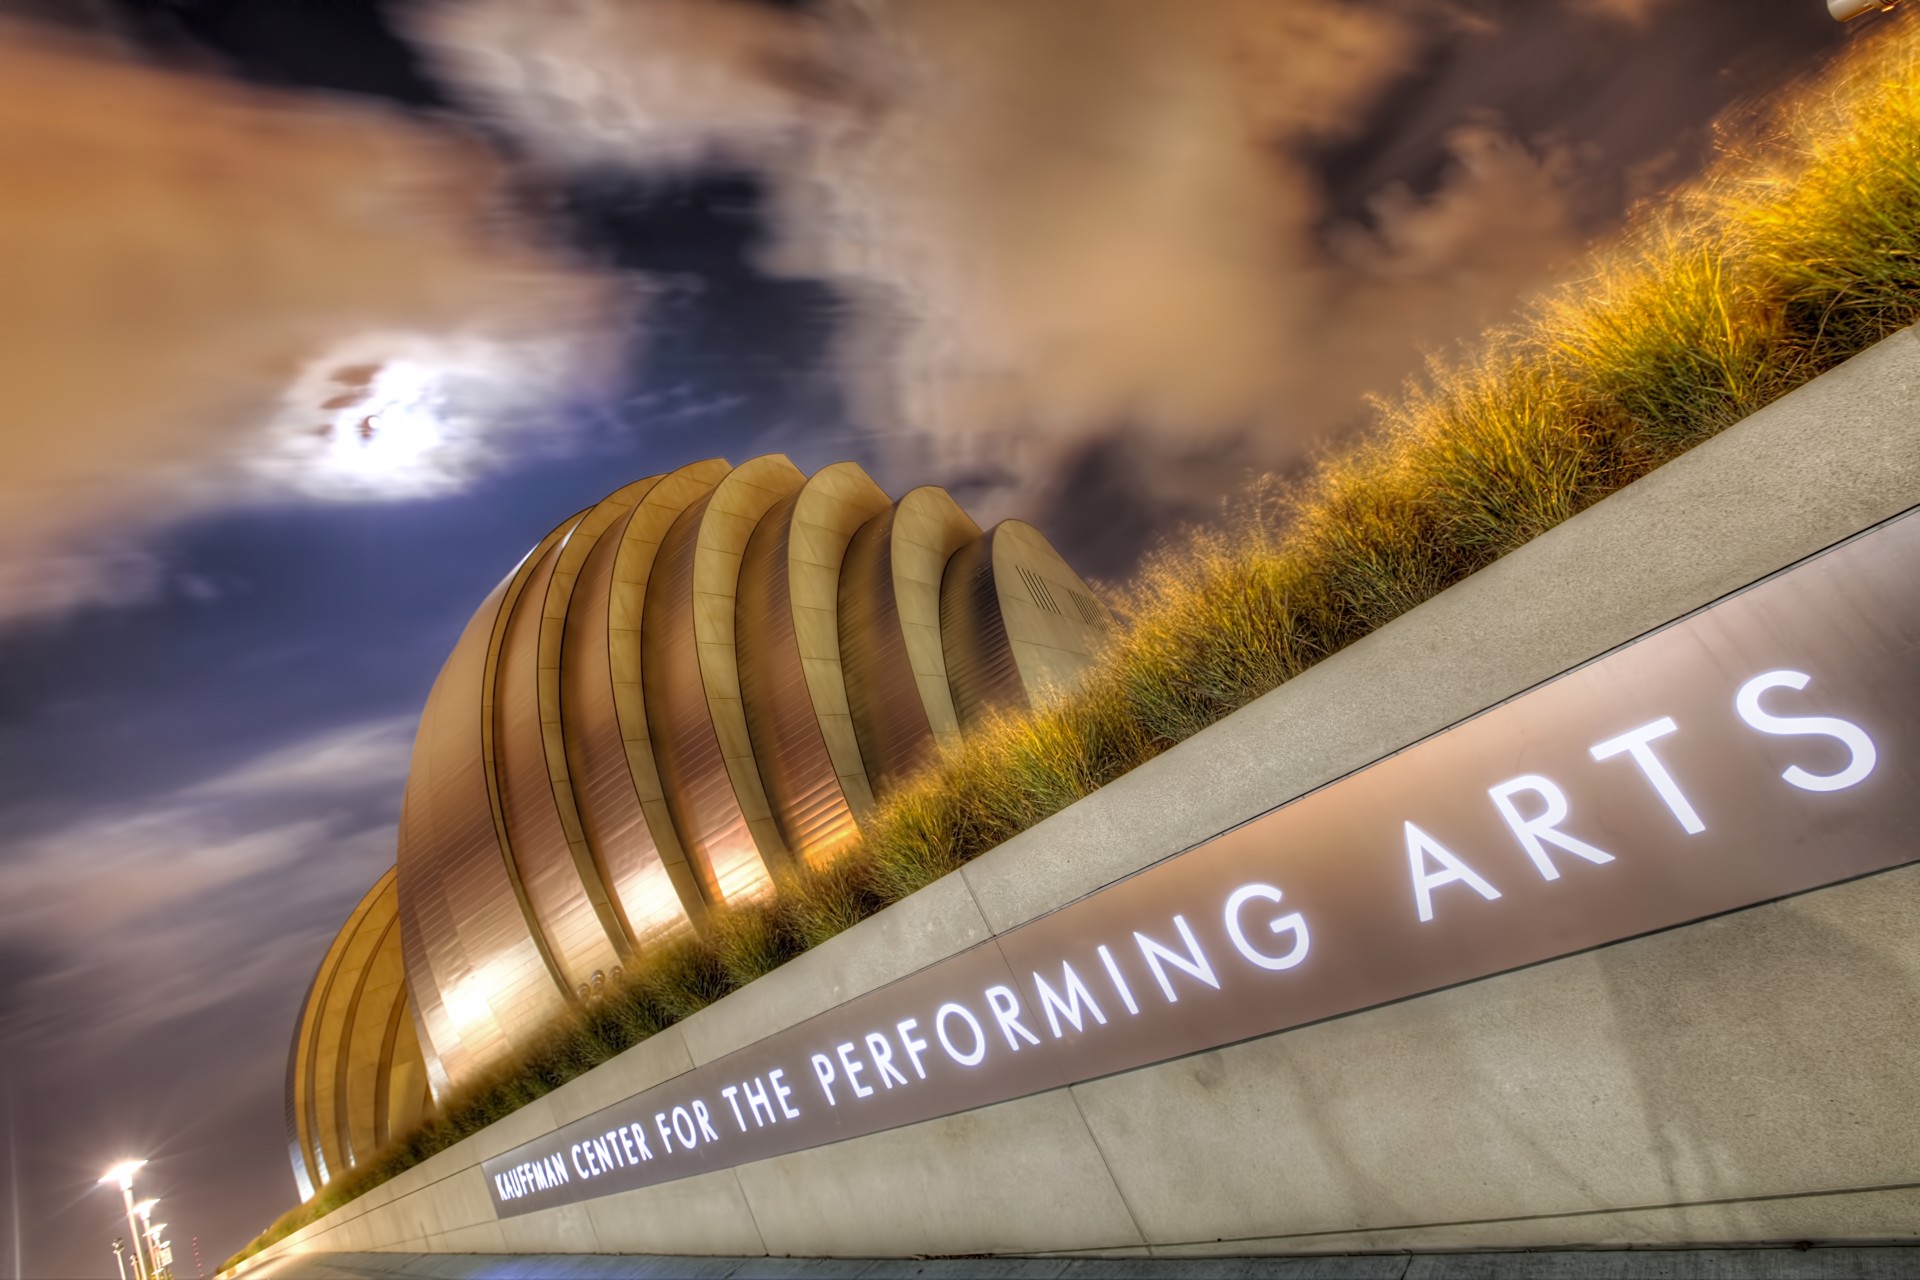 Kauffman Center For The Performing Arts by Eric Bowers